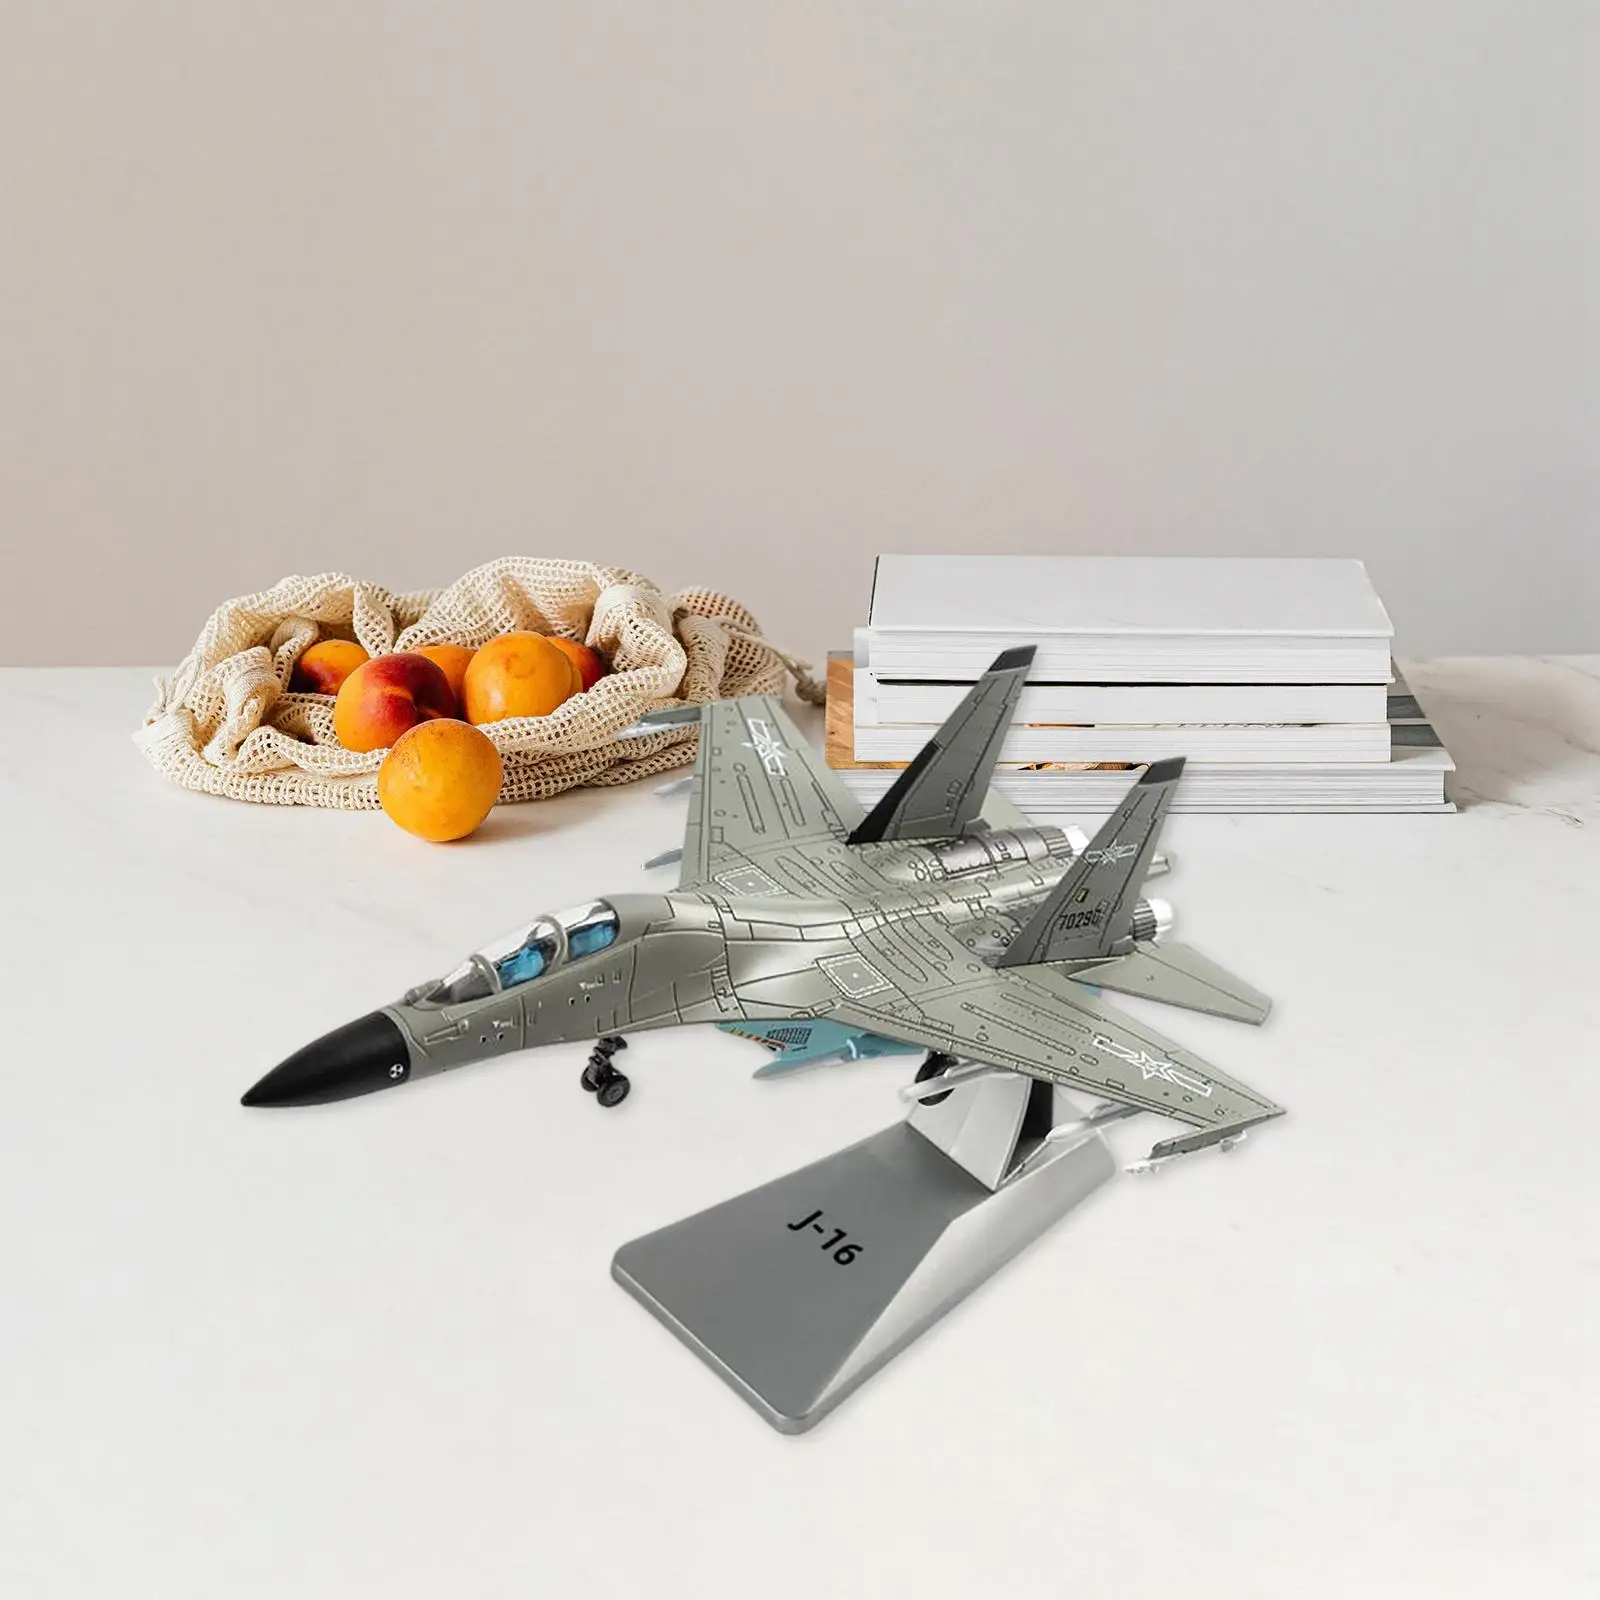 Simulation 1/100 J-16 Metal Fighter Model with Display Stand Desk Decor Souvenir Ornaments Plane Aircraft Airplane Toys